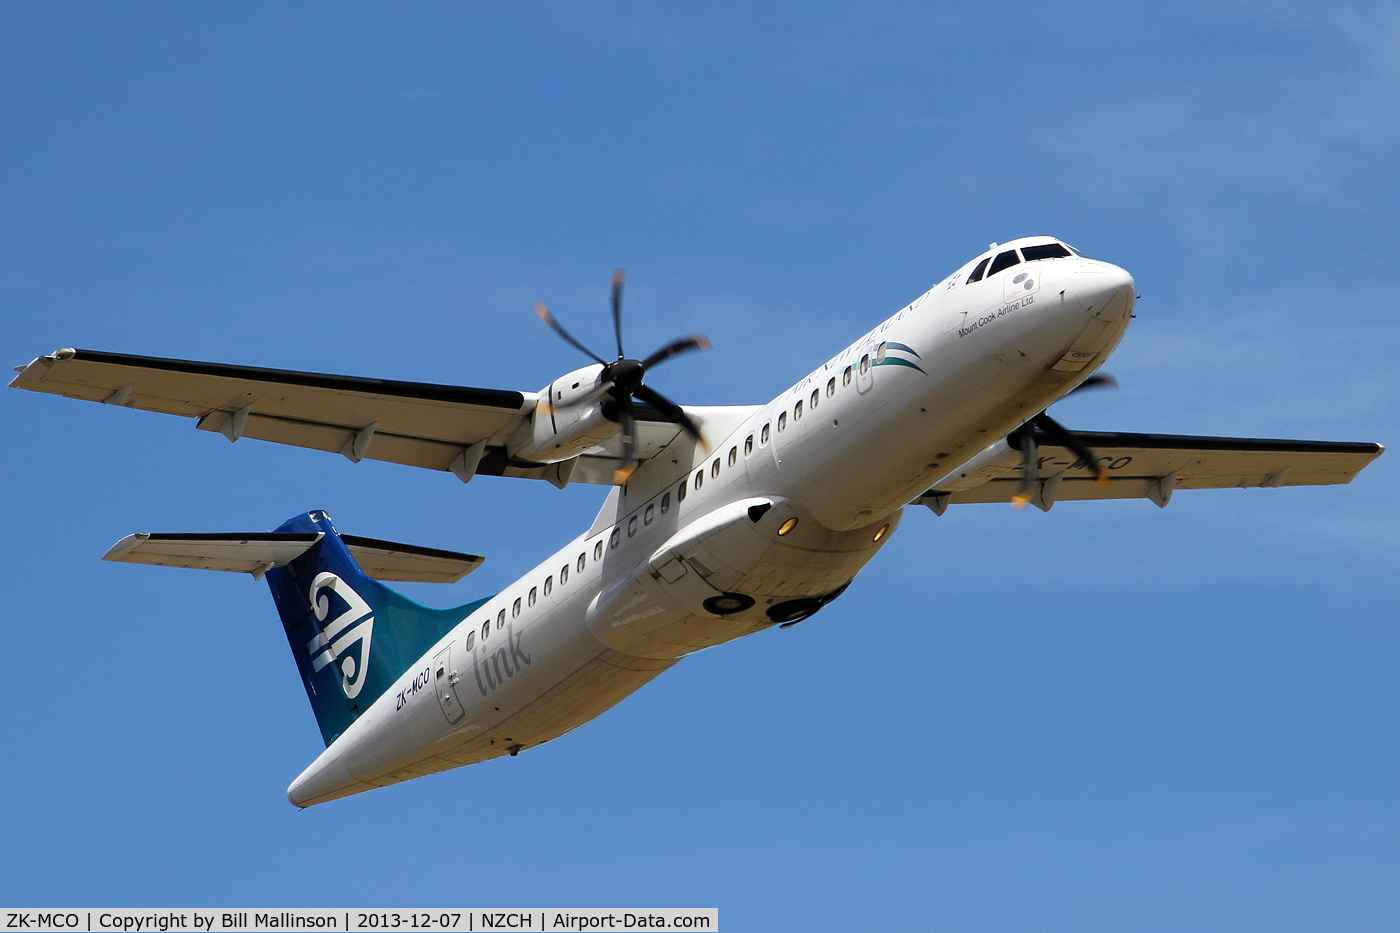 ZK-MCO, 1999 ATR 72-212A C/N 628, finals to 29